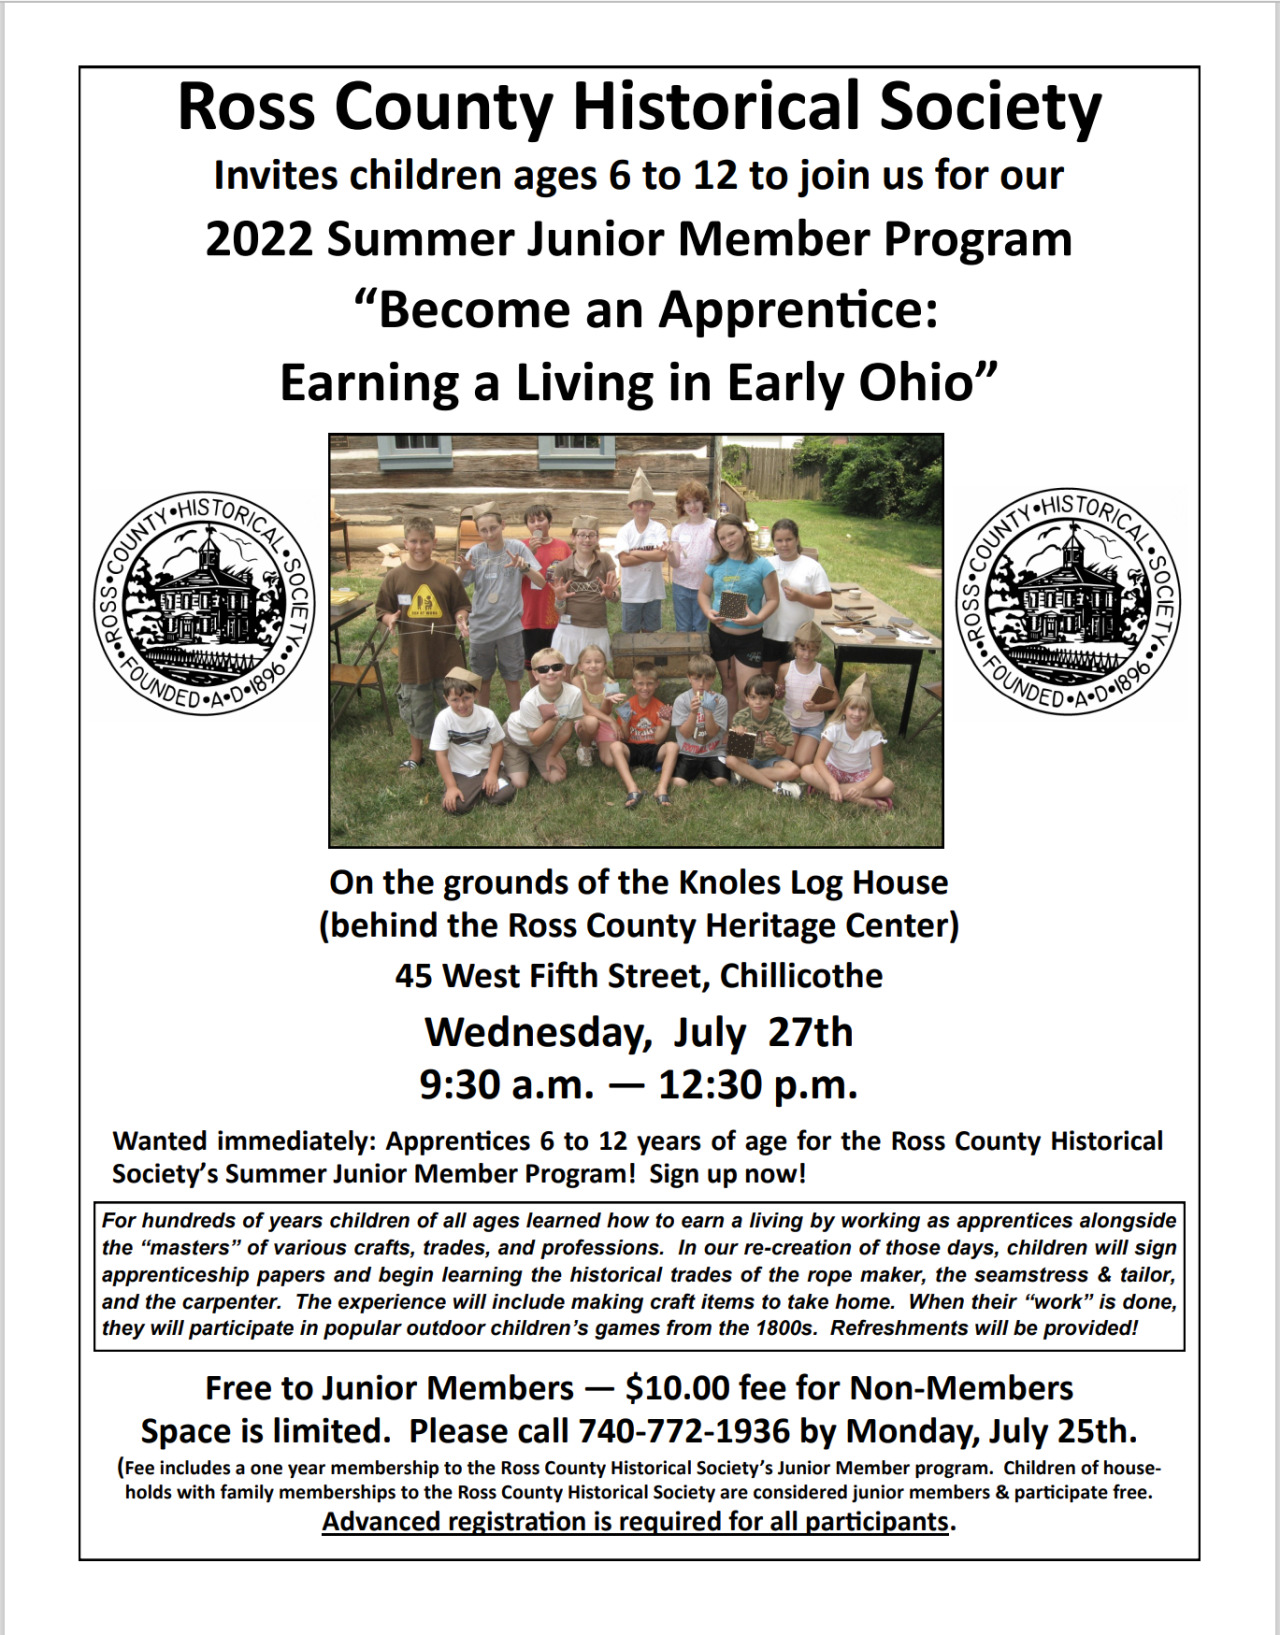 Flyer with information about the Ross County Historical Society’s Summer Junior Member Program.